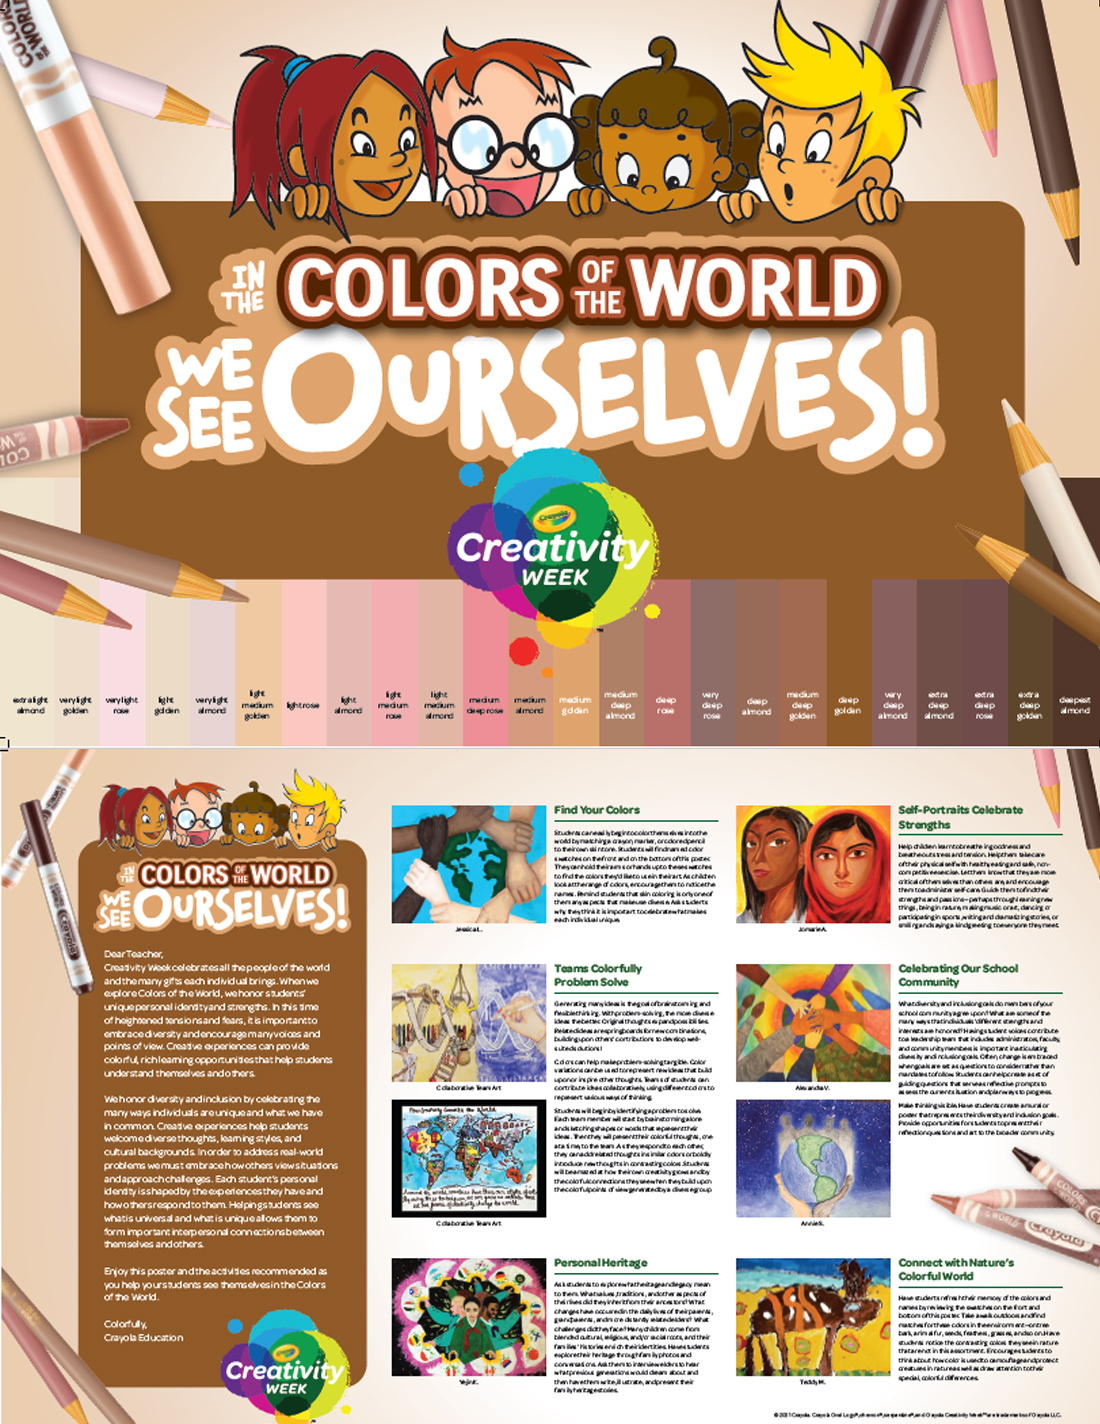 Colors of The World: How We See Ourselves